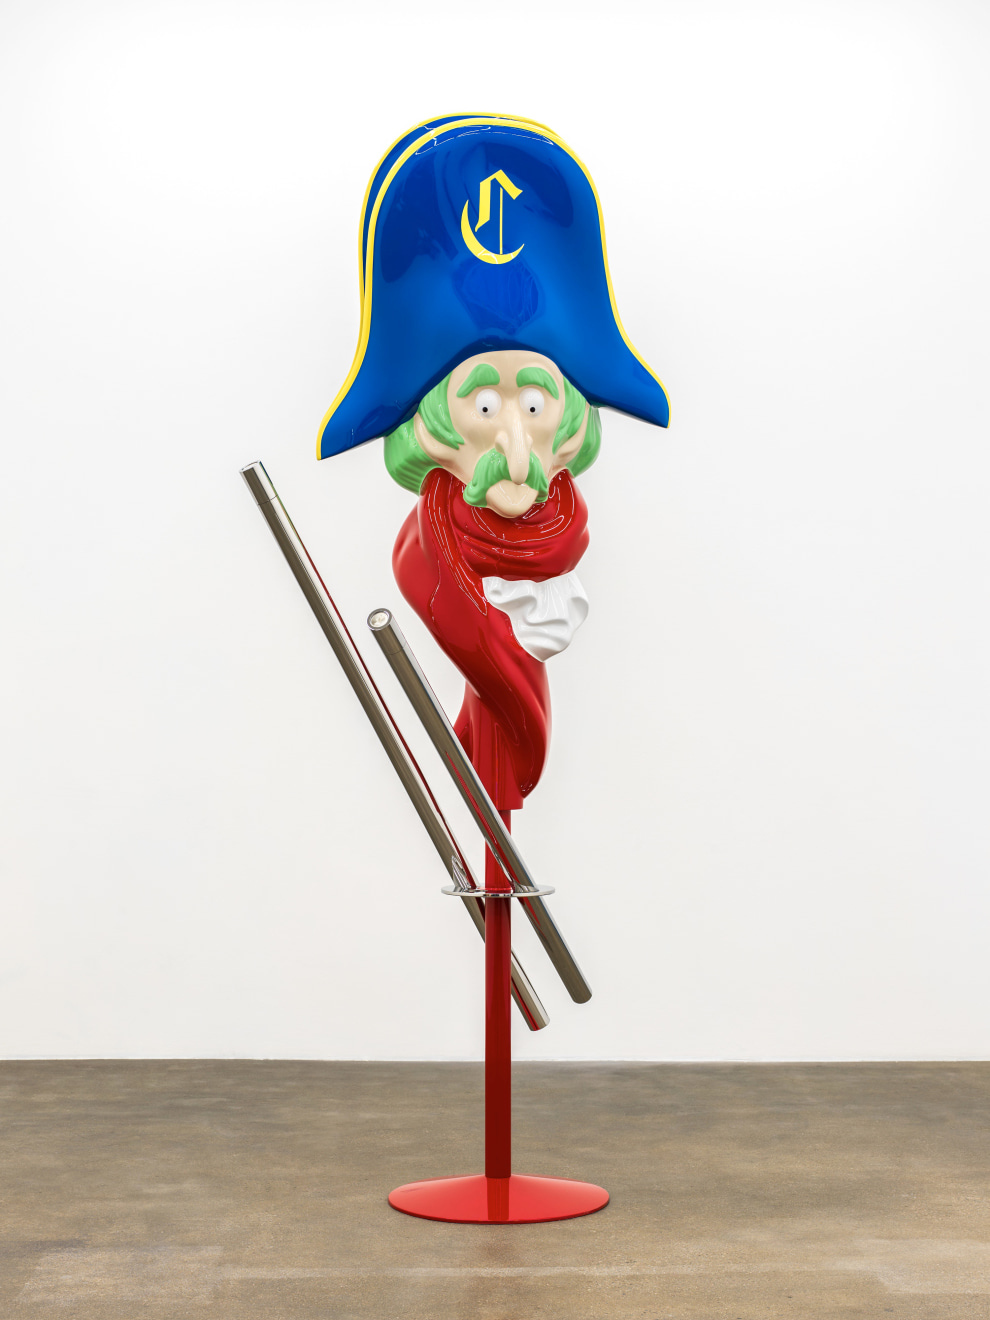 Kathryn Andrews, Coming to America (Filet-O-Fish), 2013